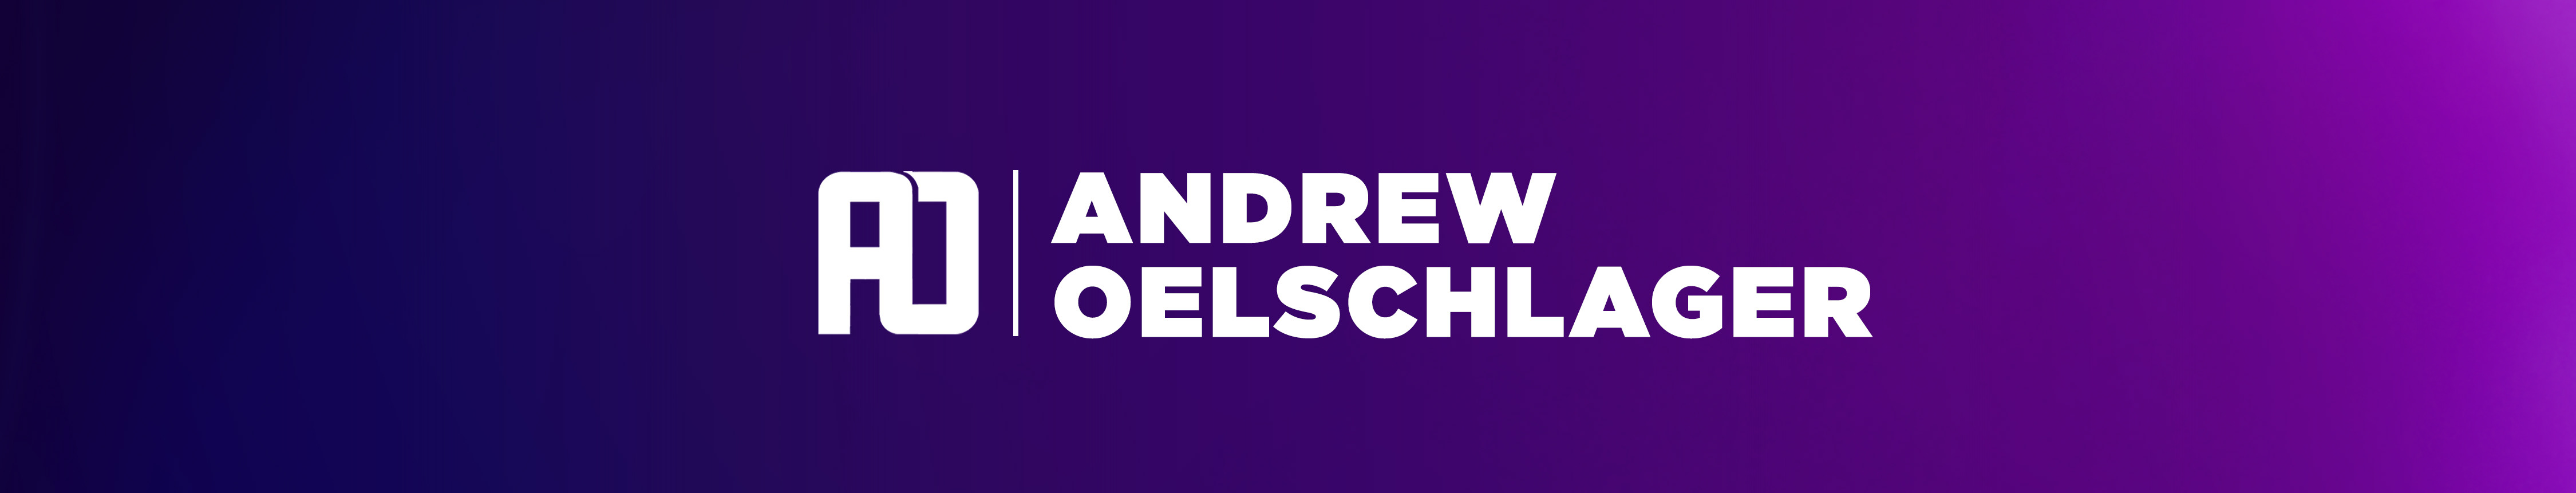 Andrew Oelschlager's profile banner